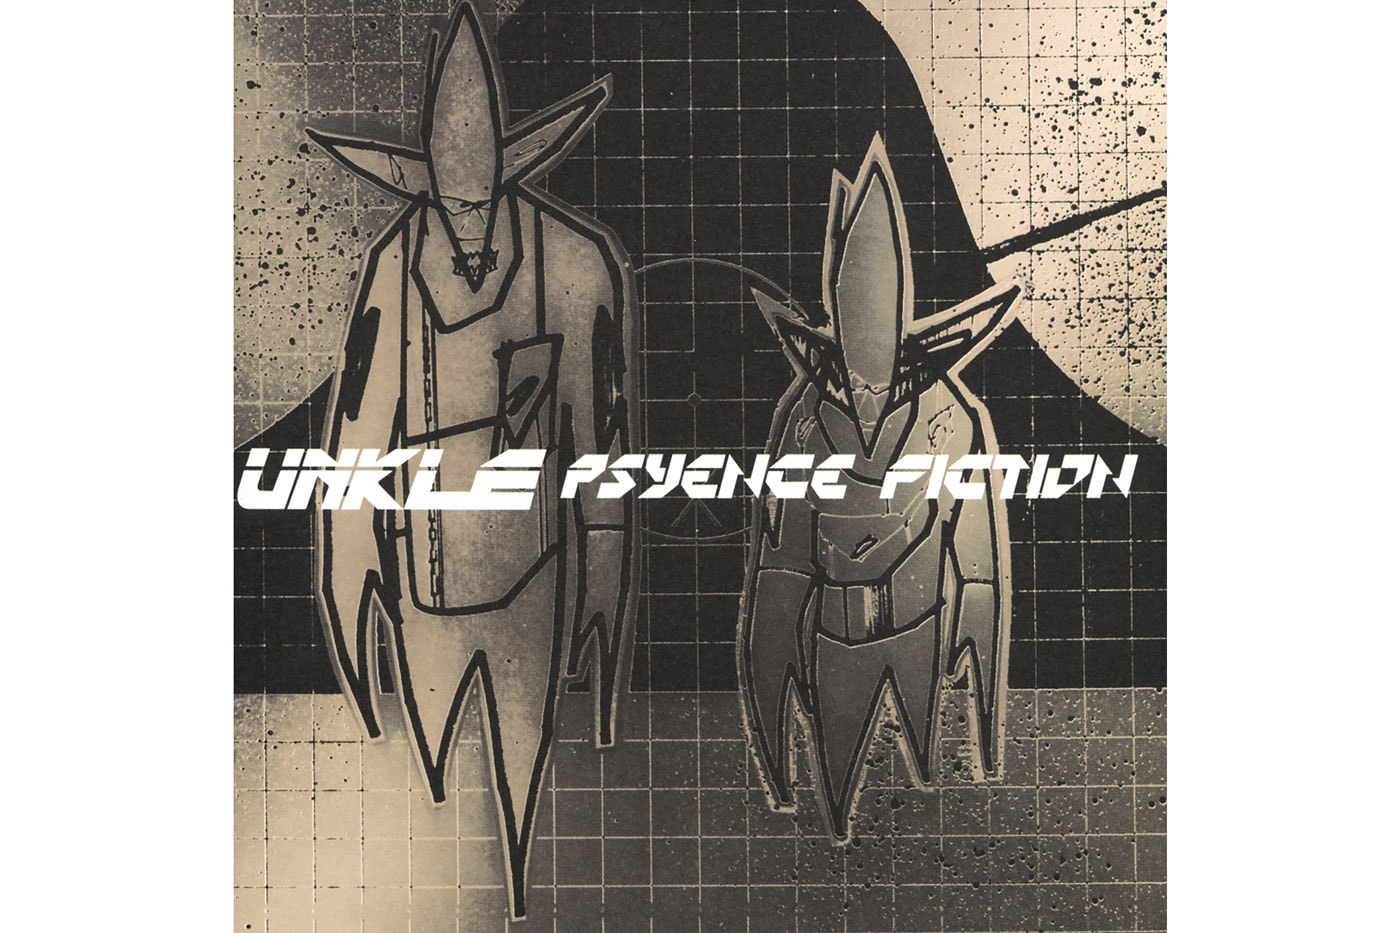 UNKLE – Rabbit In Your Headlights (Massive Attack Mix)